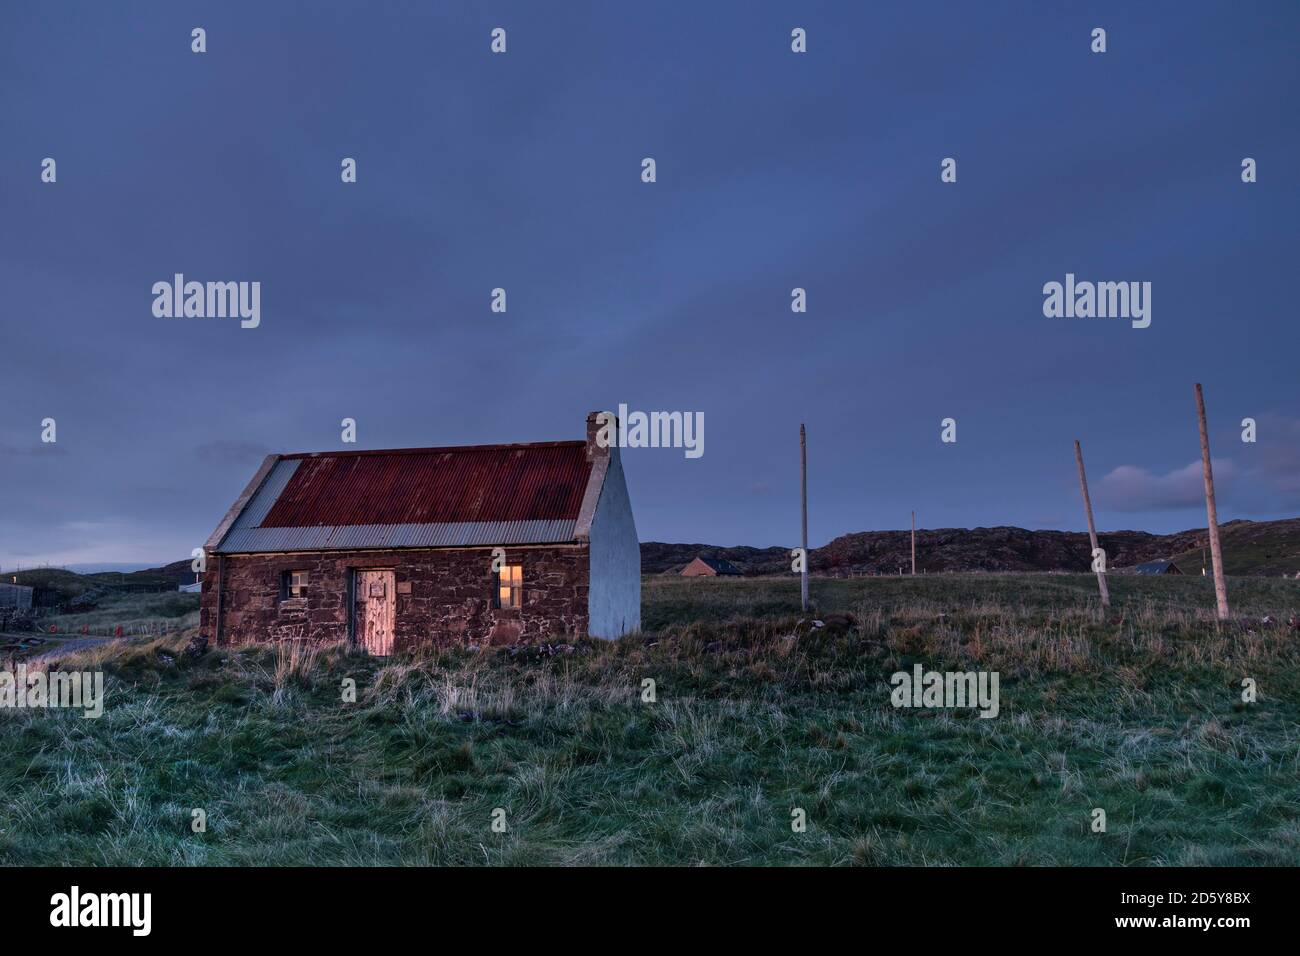 The Clachtoll Salmon Fishing Bothy with Net Drying Posts as Night Falls Over Clachtoll, Assynt, NW Highlands, Scotland, UK Stock Photo